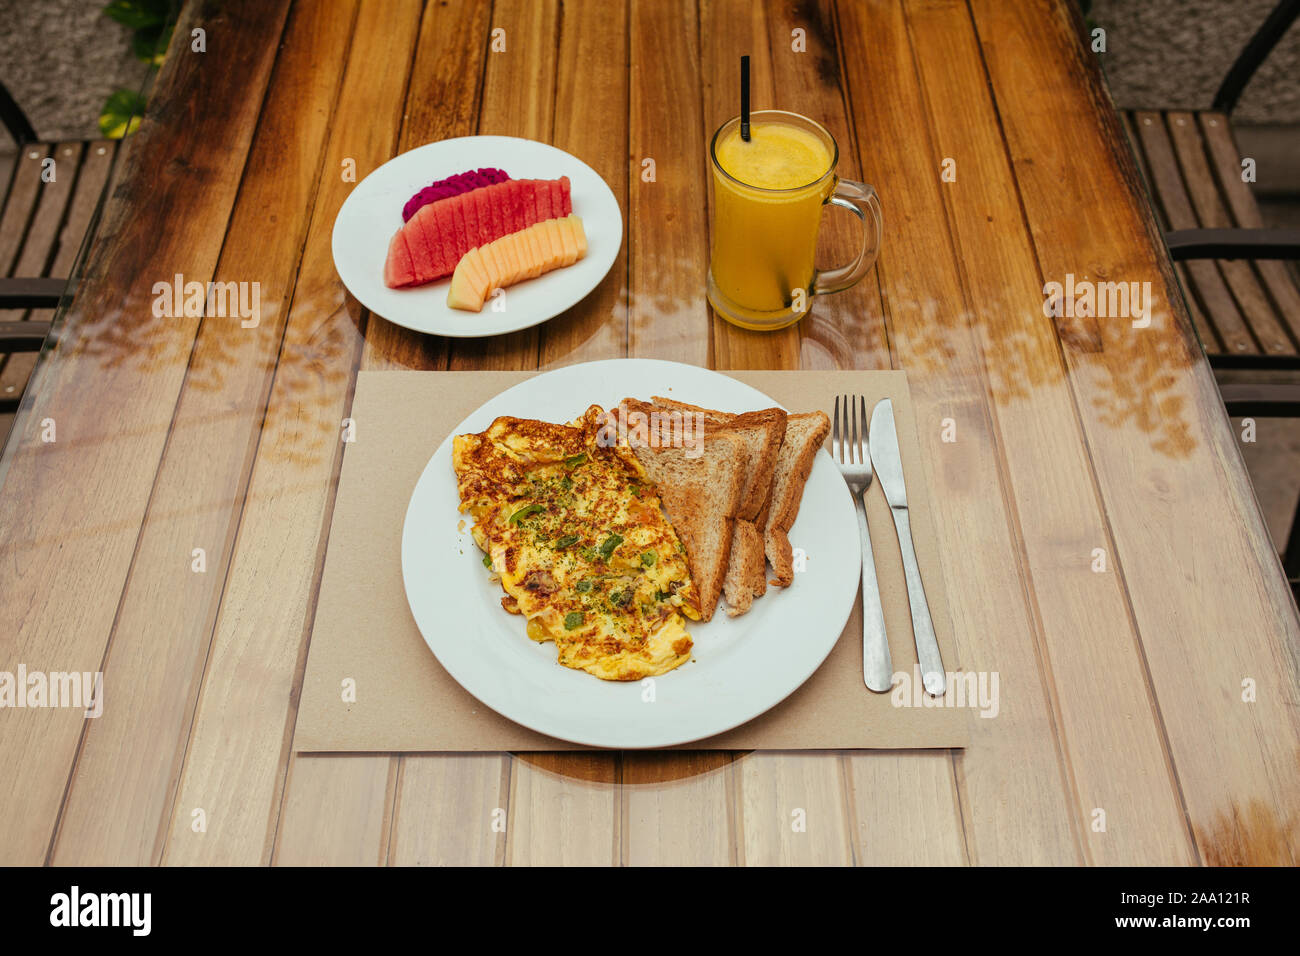 Omelet with vegetables, bread toast and fresh Juice on white a plate Stock Photo